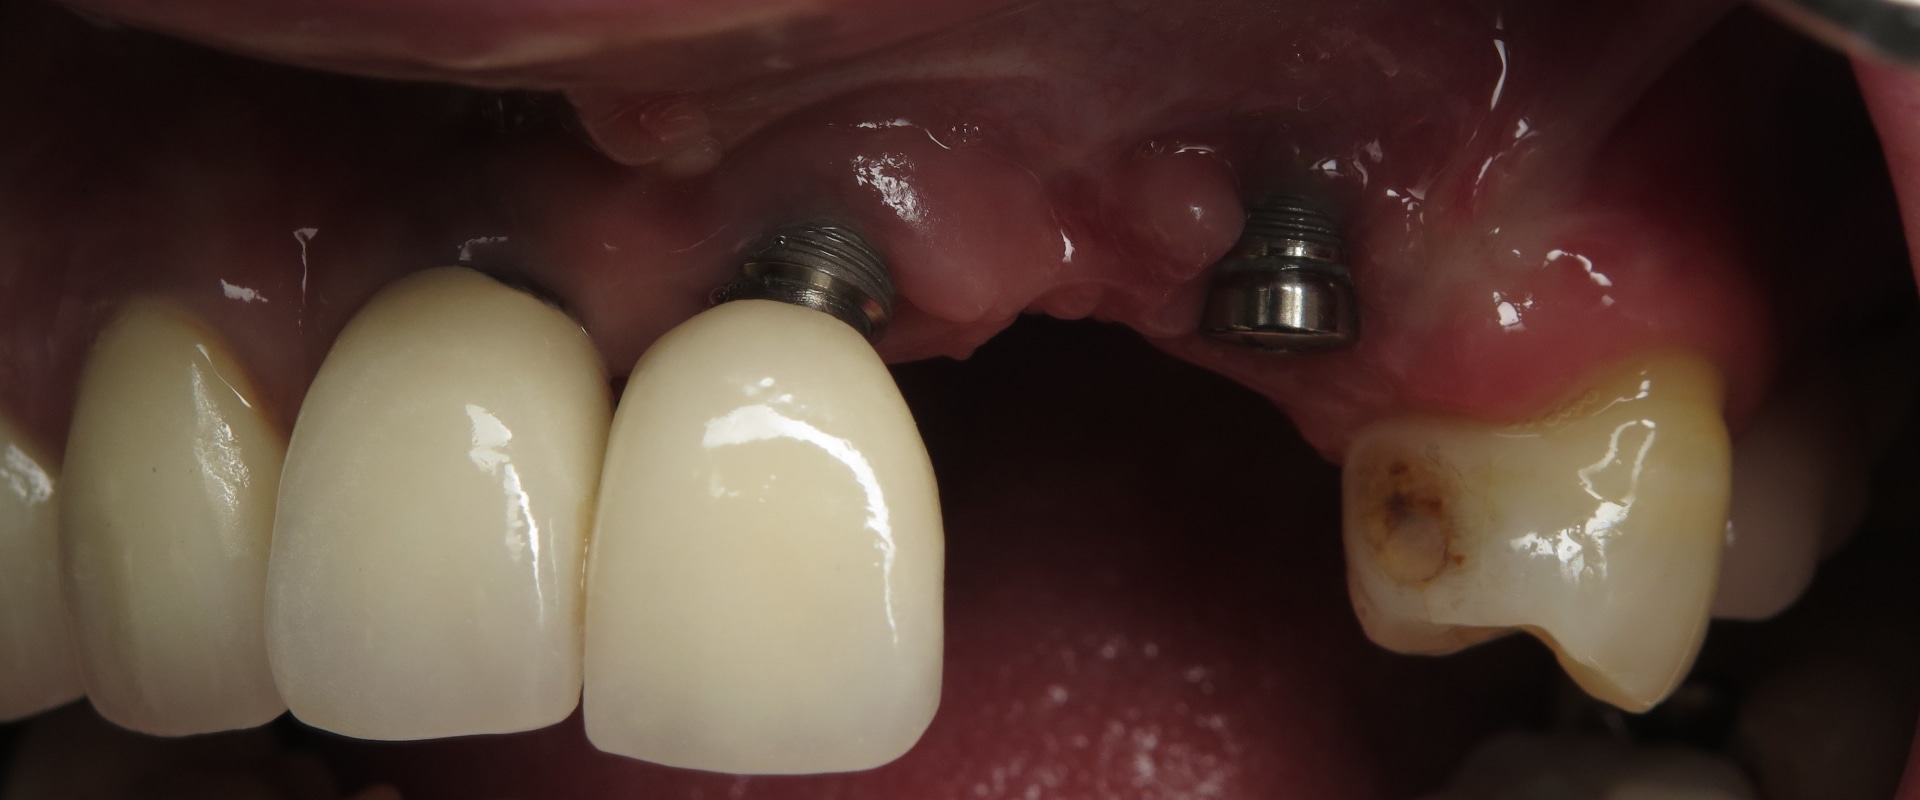 Can I Go Back to Work After a Dental Implant Procedure?